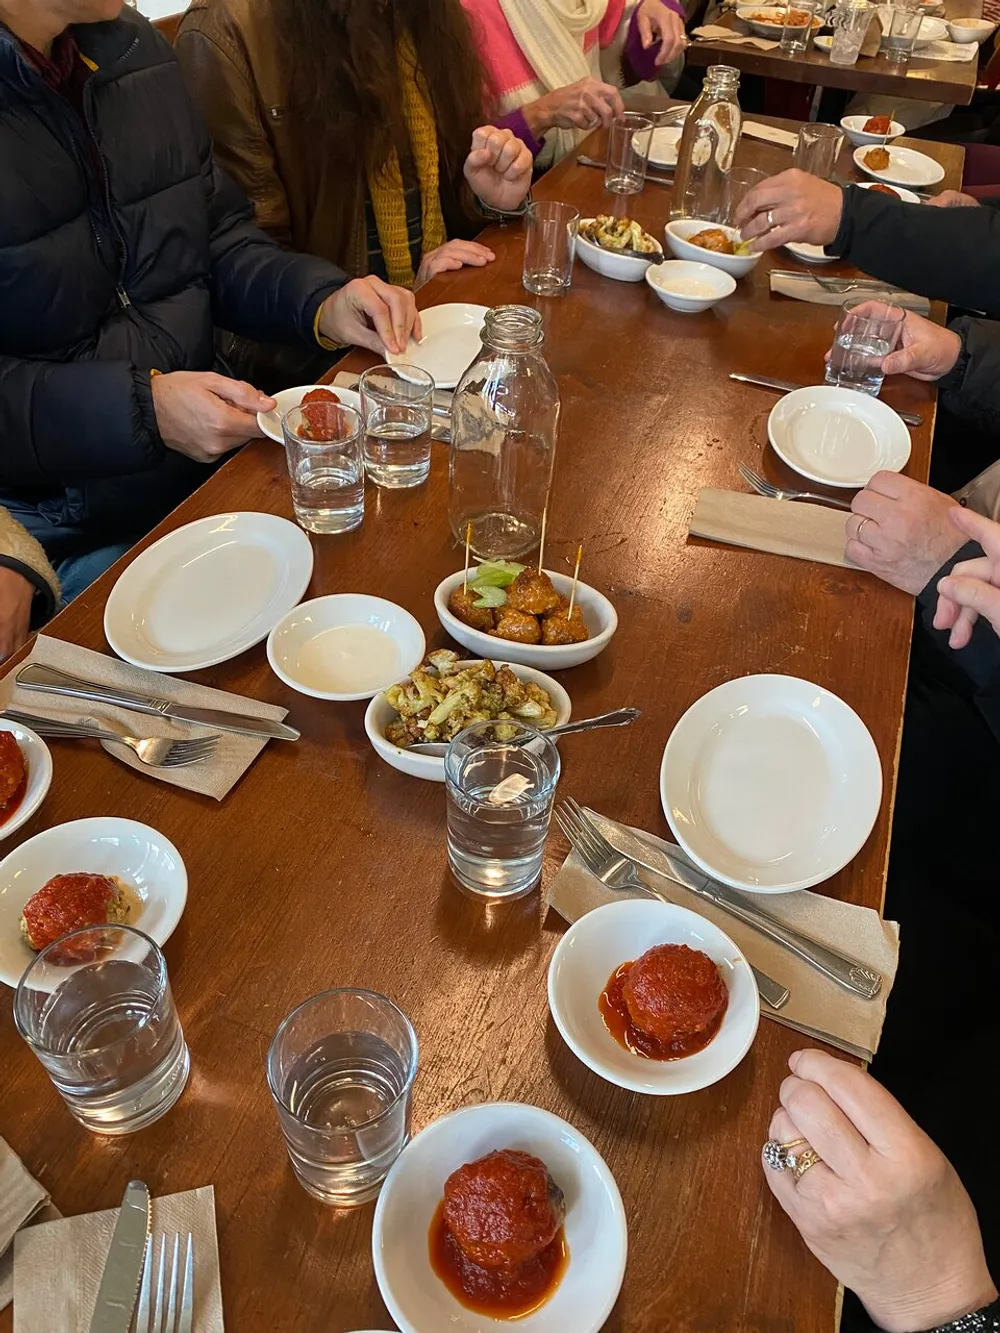 A group of individuals is gathered around a table enjoying a meal with various dishes including what appears to be meatballs and glasses of water